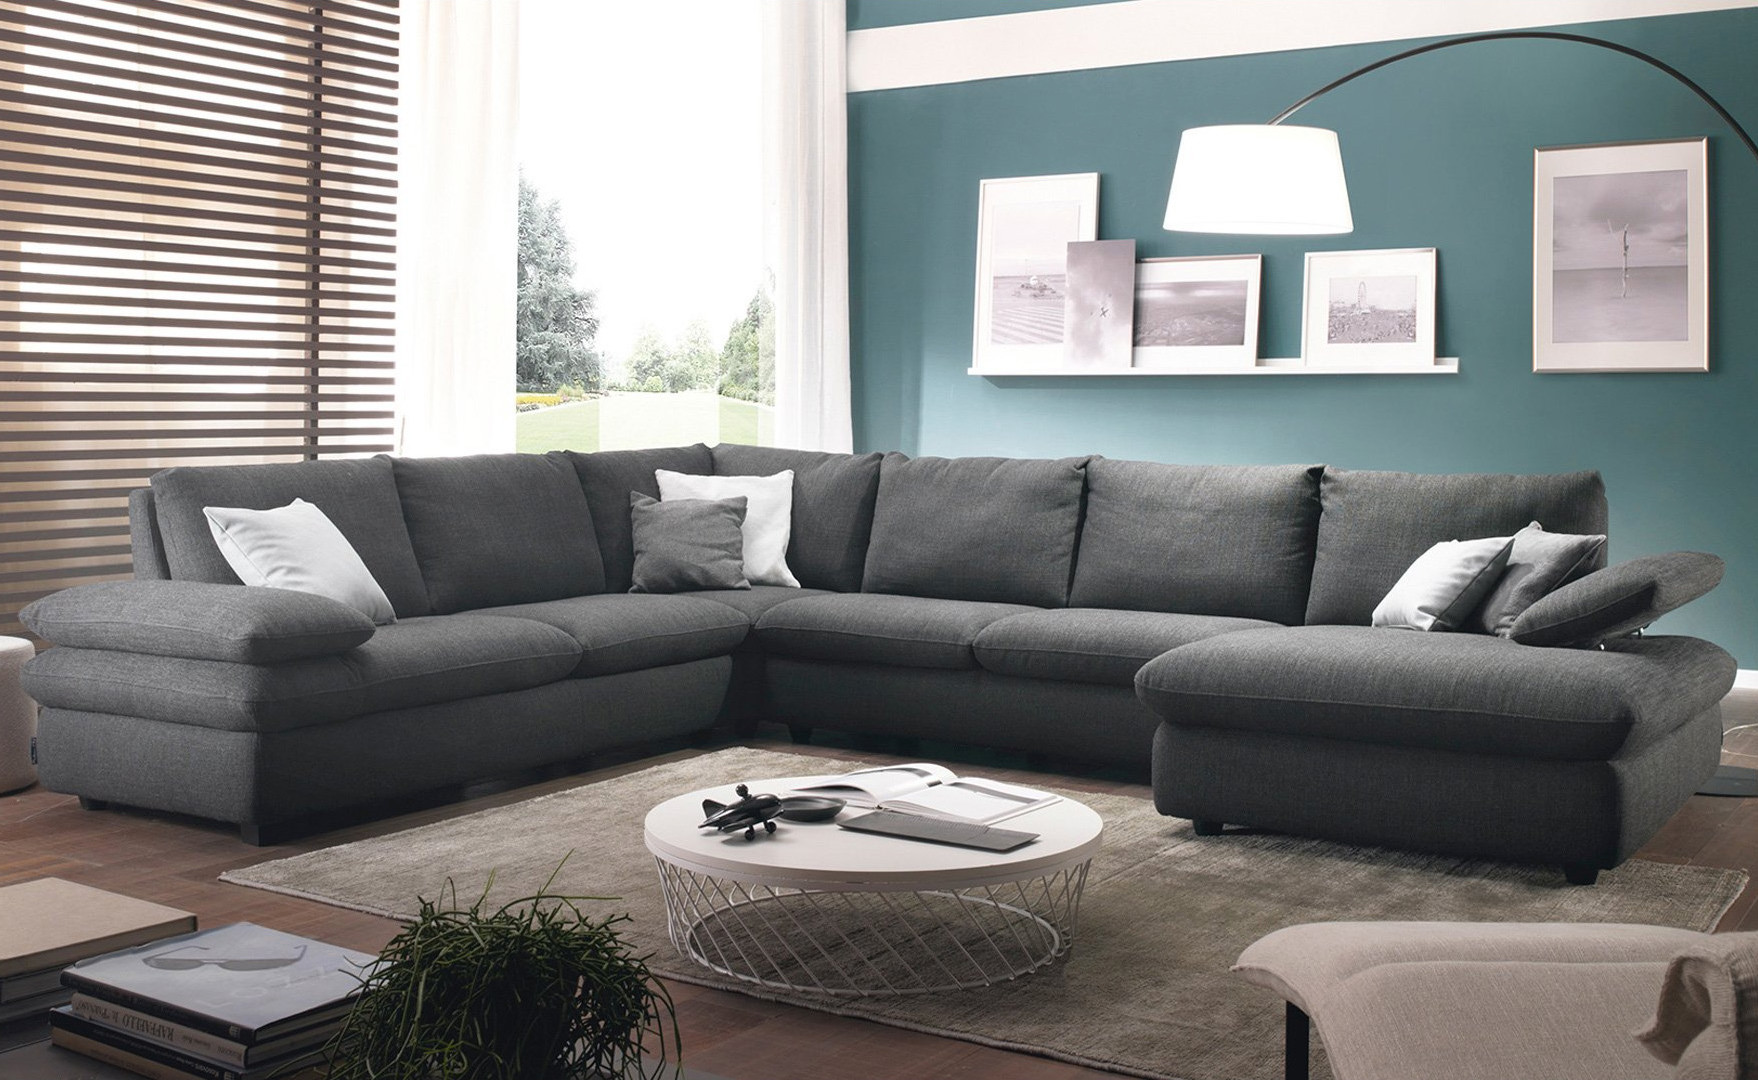 Chateau d'Ax America 1870 Italian Sectional Sofa | MIG Furniture - Modern -  Living Room - New York - by MIG Furniture Design, Inc. | Houzz